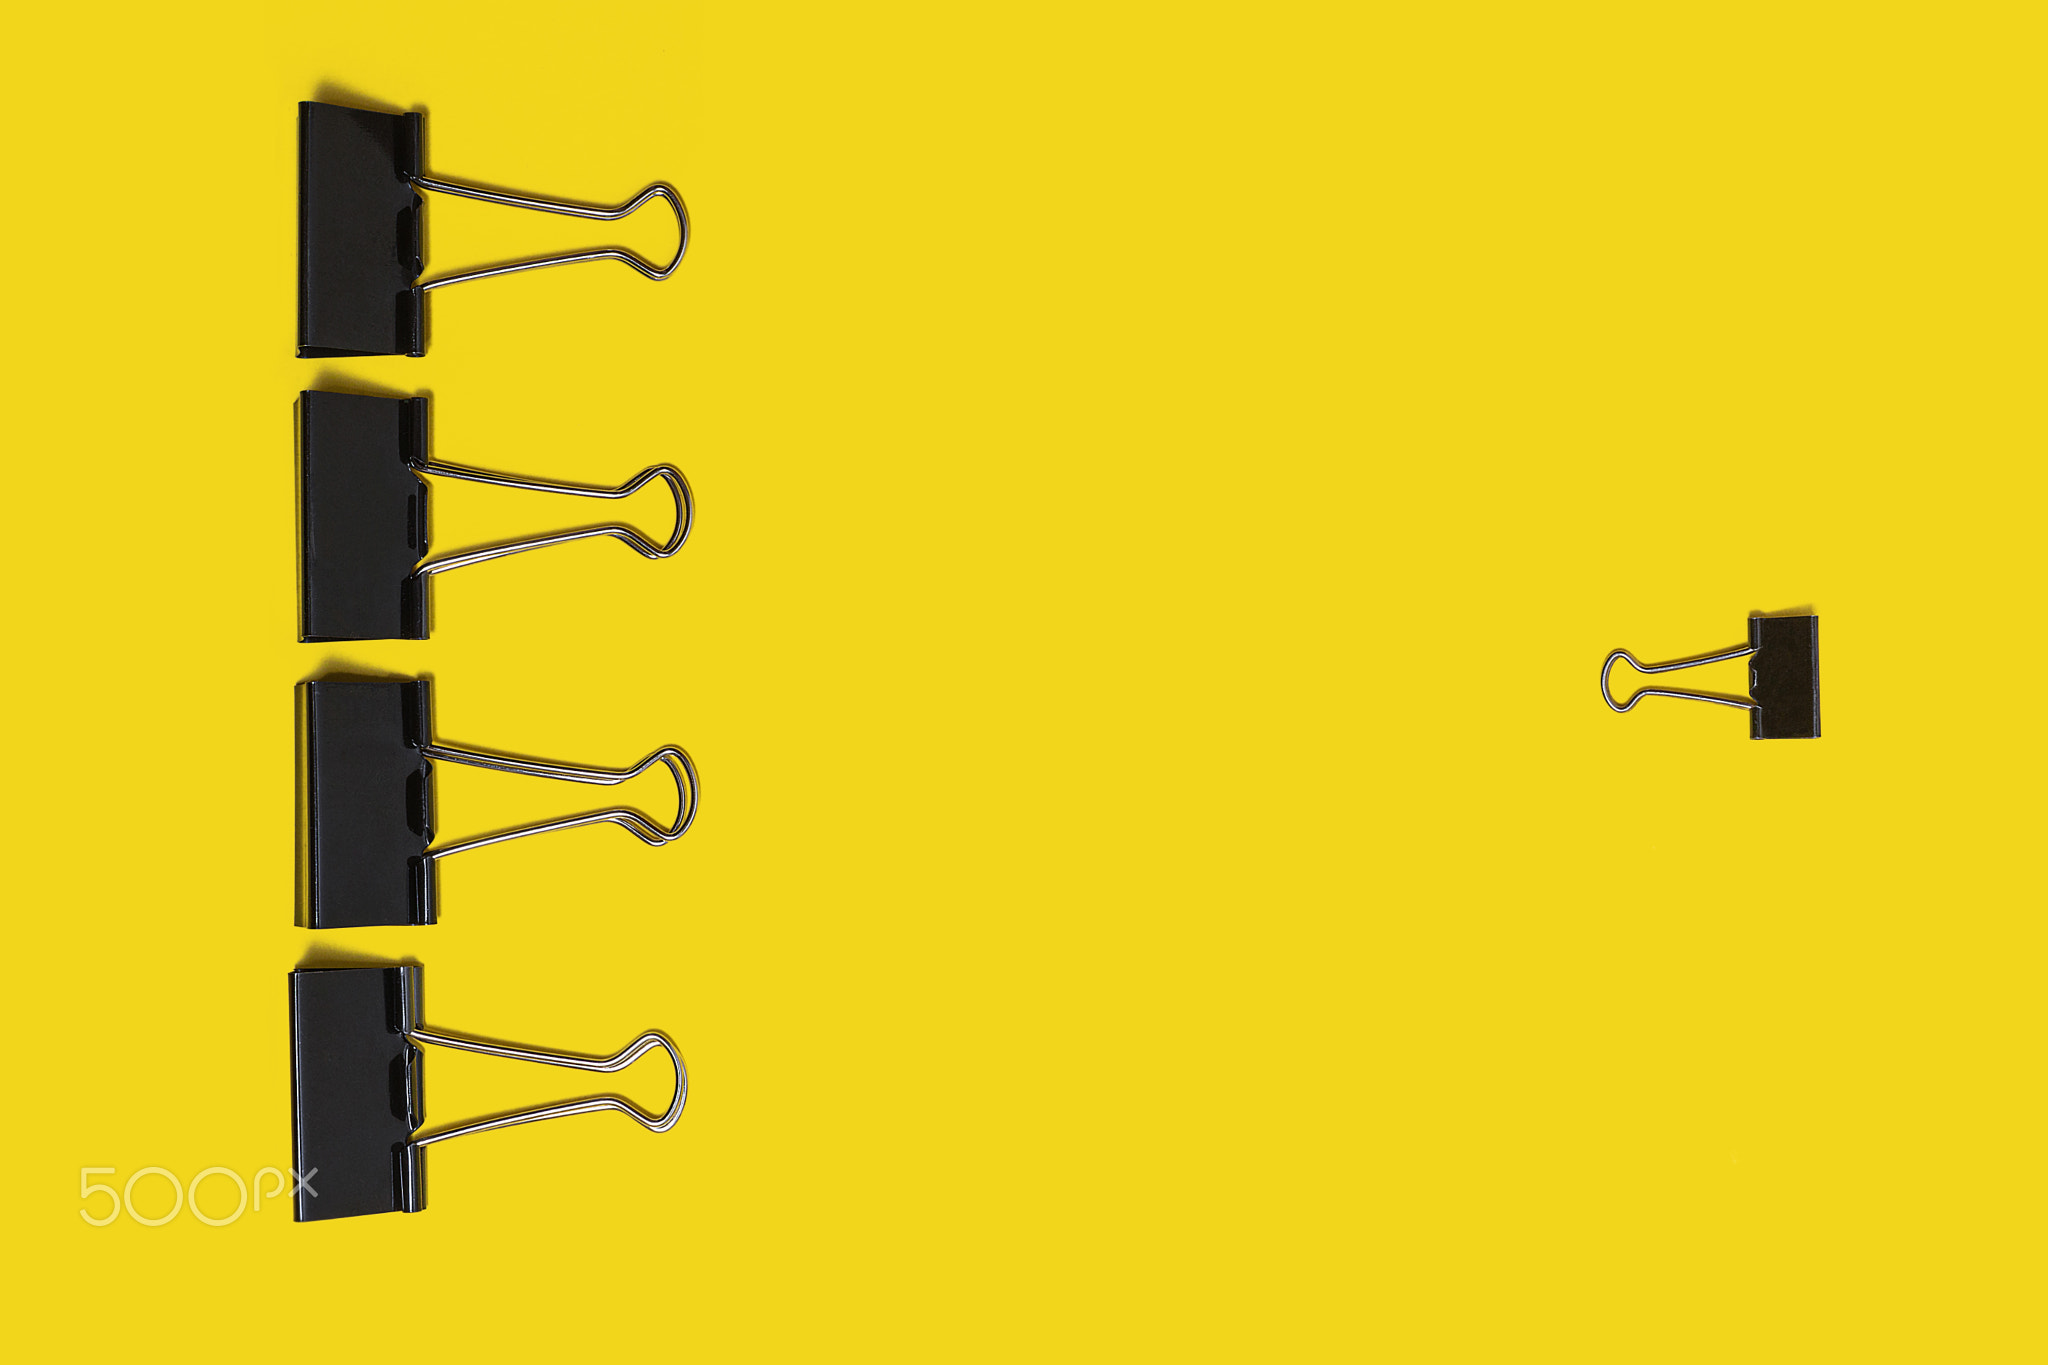 four big paper clips against small one lying on a yellow background